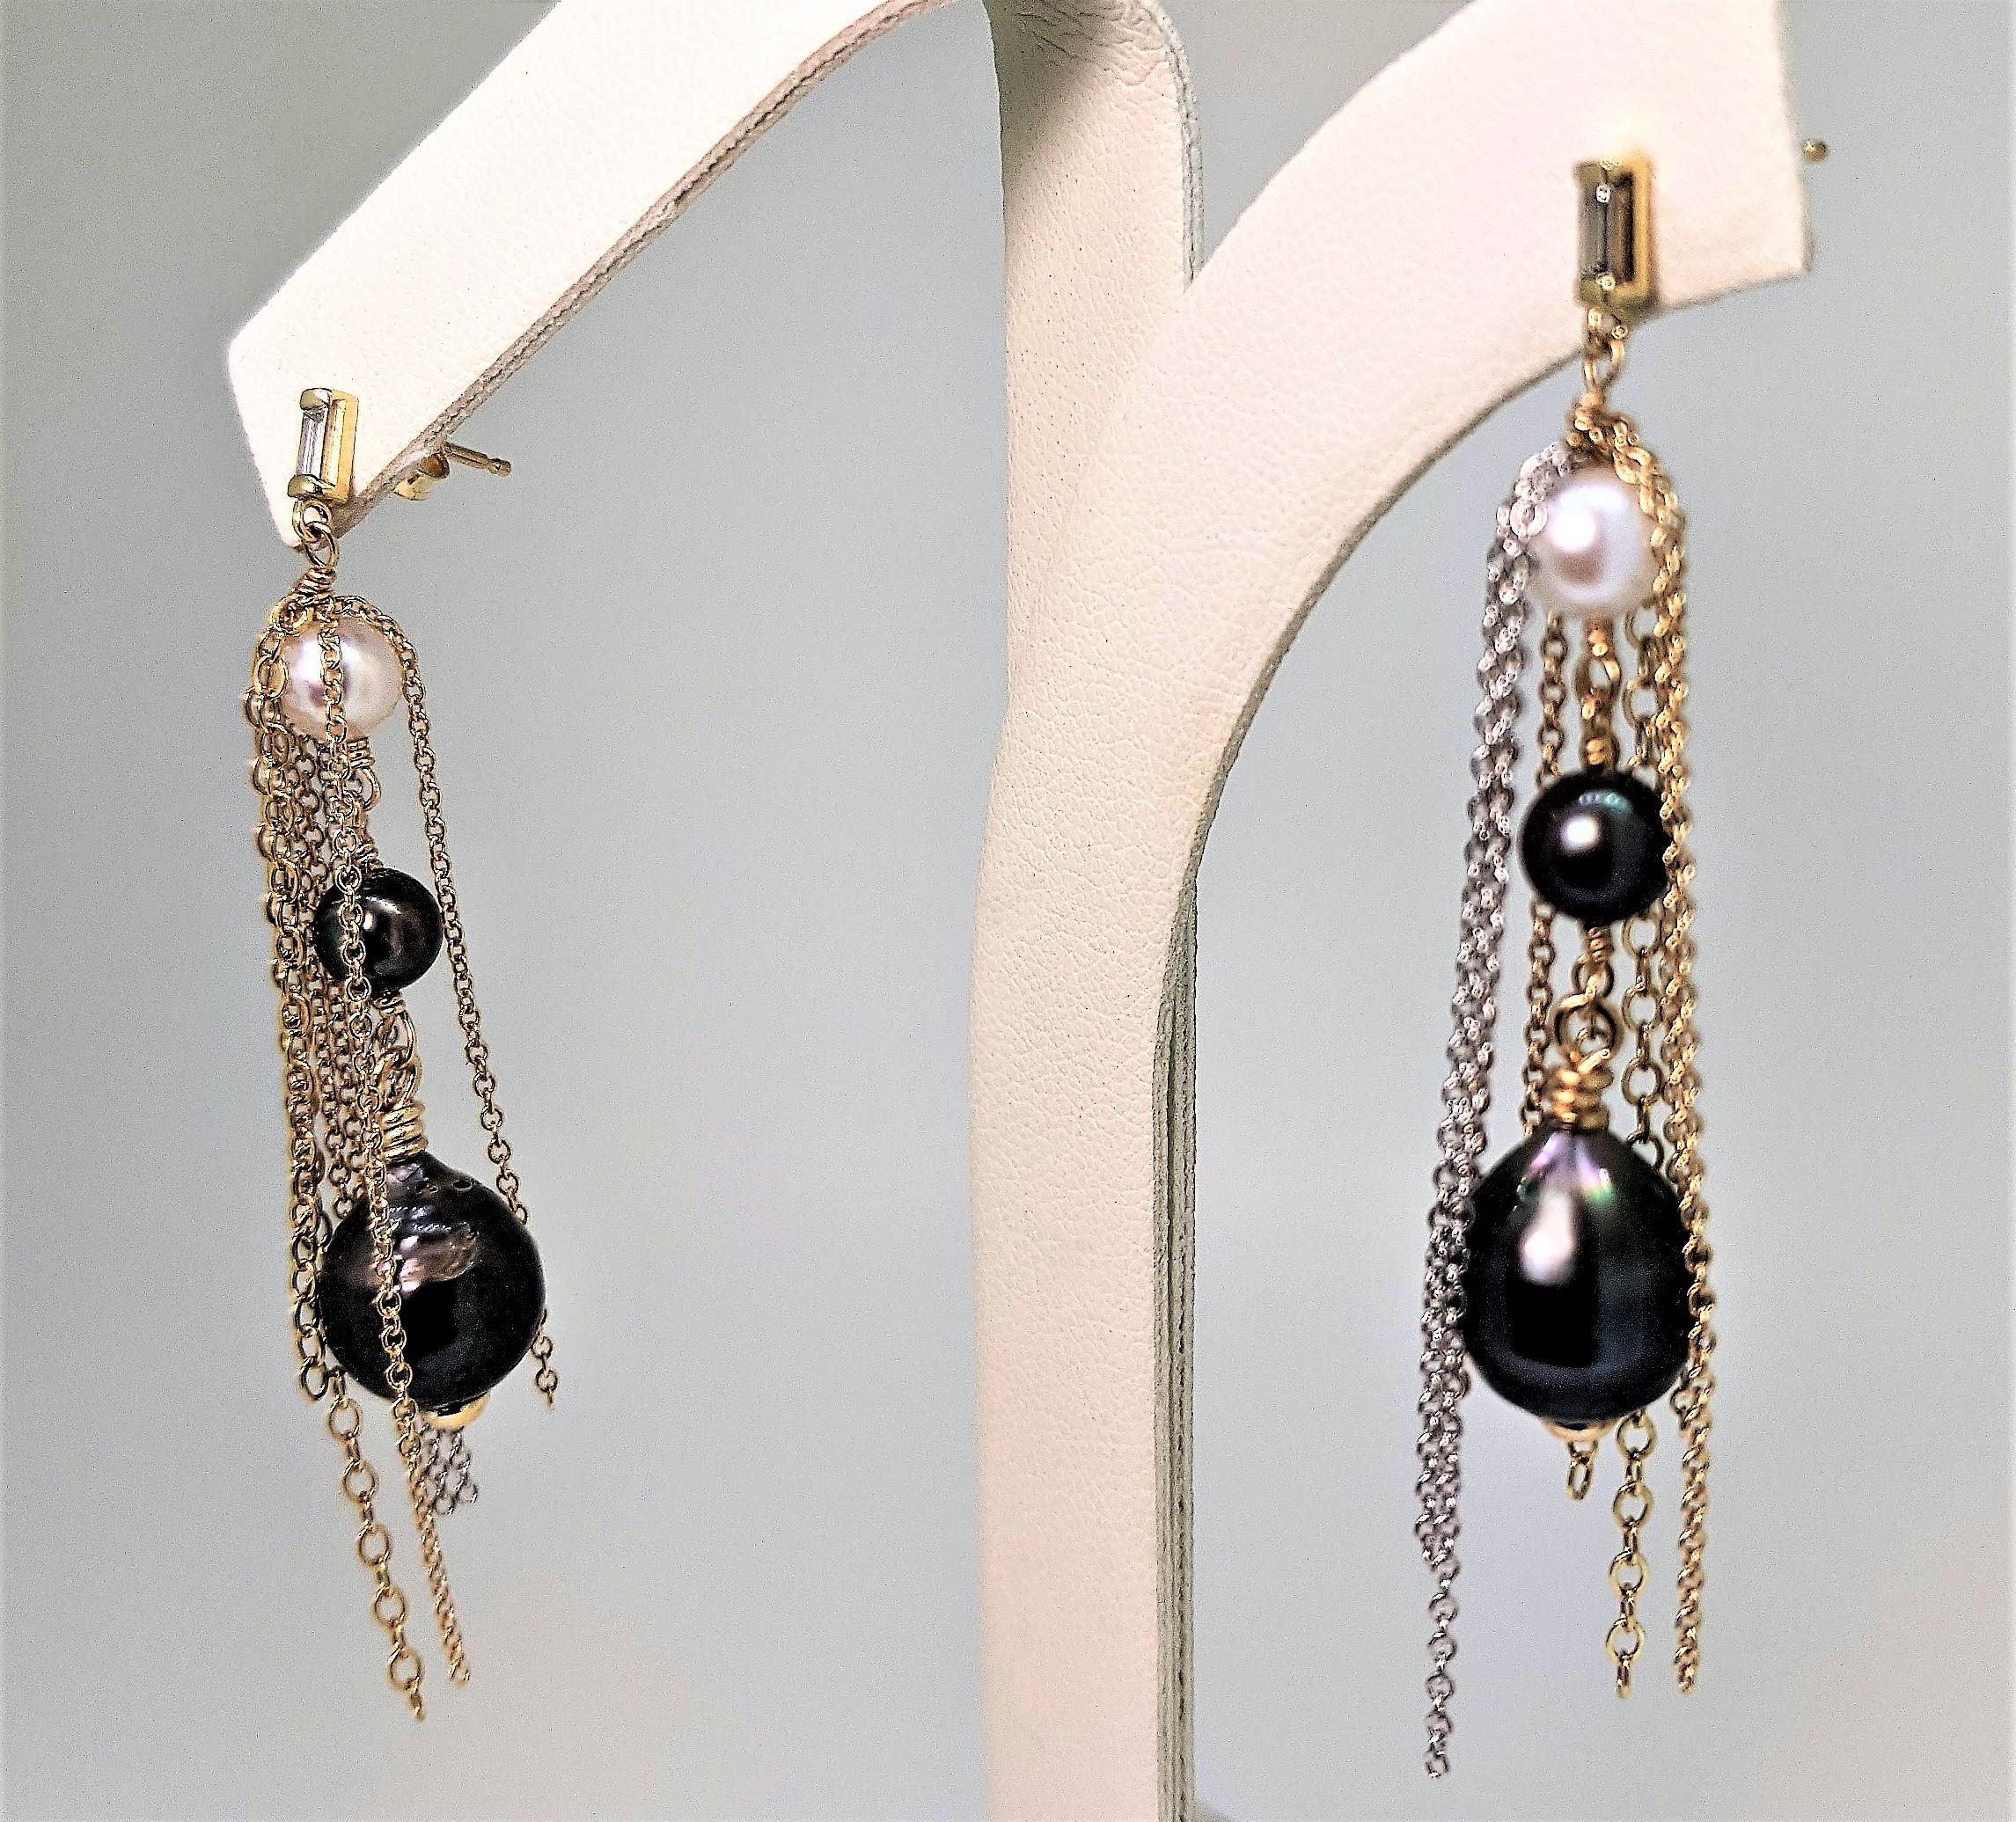 These earrings are a little dainty, a little funky and elegant, fun and edgy. These are special one-of-a-kind earrings and they were created to show movement, textures and to have fun with pearls. Pearls definitely do not have to be classic to be